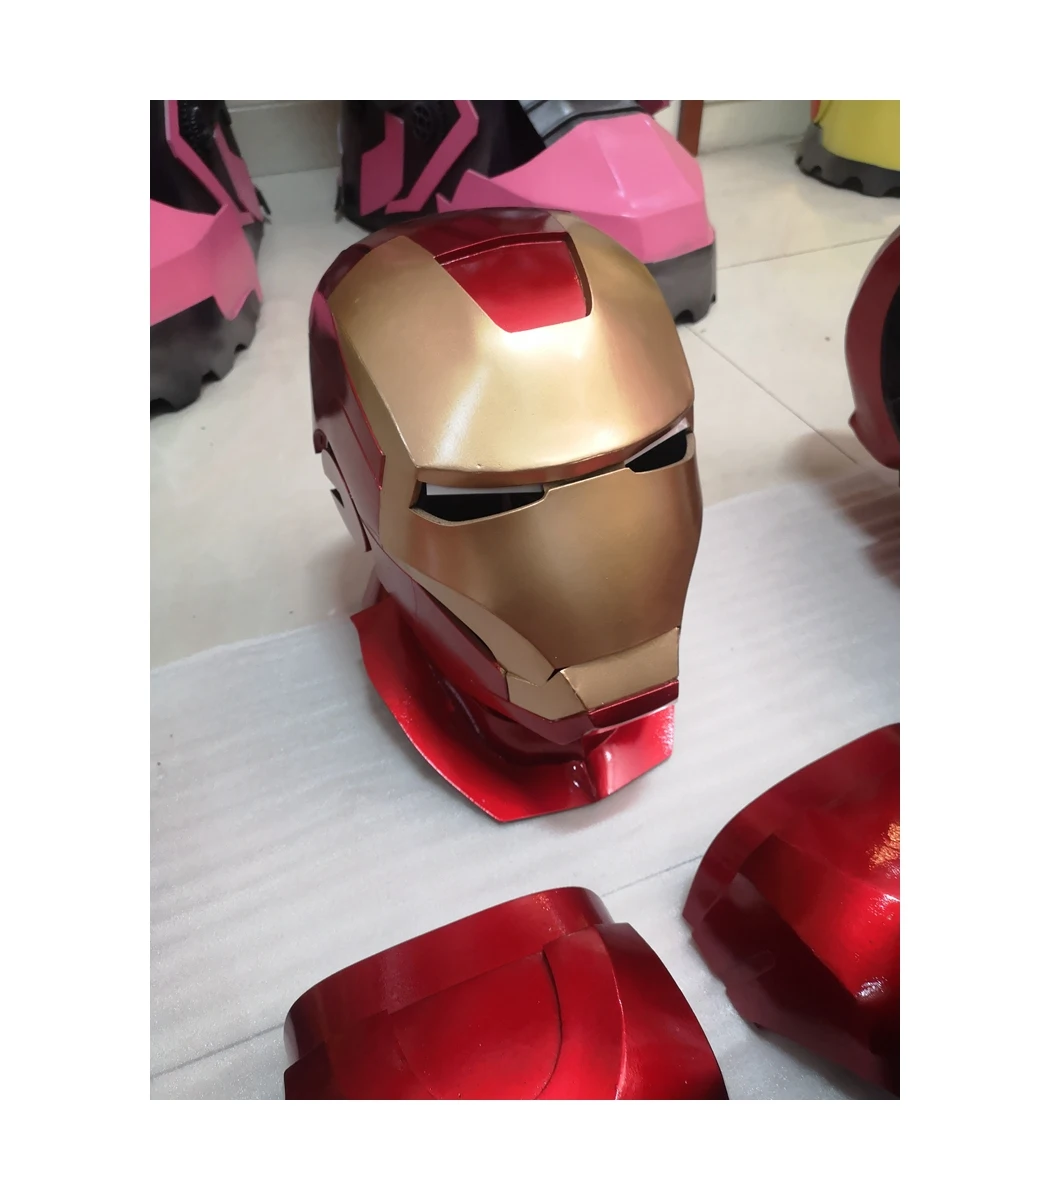 Hot Selling Good Quality Realistic Wearable Figure Cosplay Realistic Adult Costume Adult Robot Toy